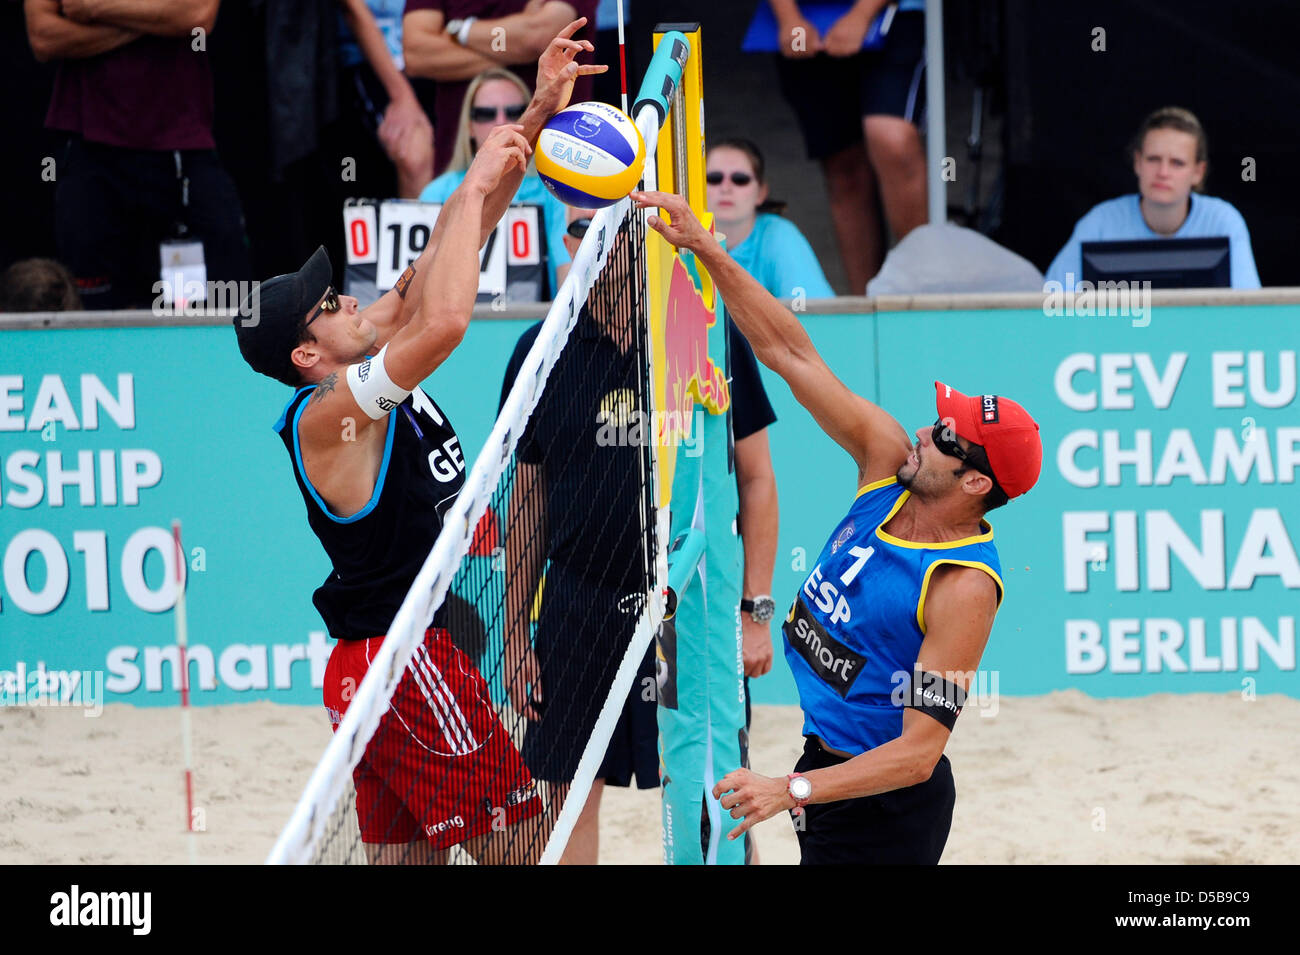 Germany's Eric Koreng contests Spain's Inocencio Lario Carrillo during the match Carrillo/Mesa versus Klemperer/Koreng at the European Beach Volleyball Championships in Berlin, Germany, 13 August 2010. Photo: ROBERT SCHLESINGER Stock Photo